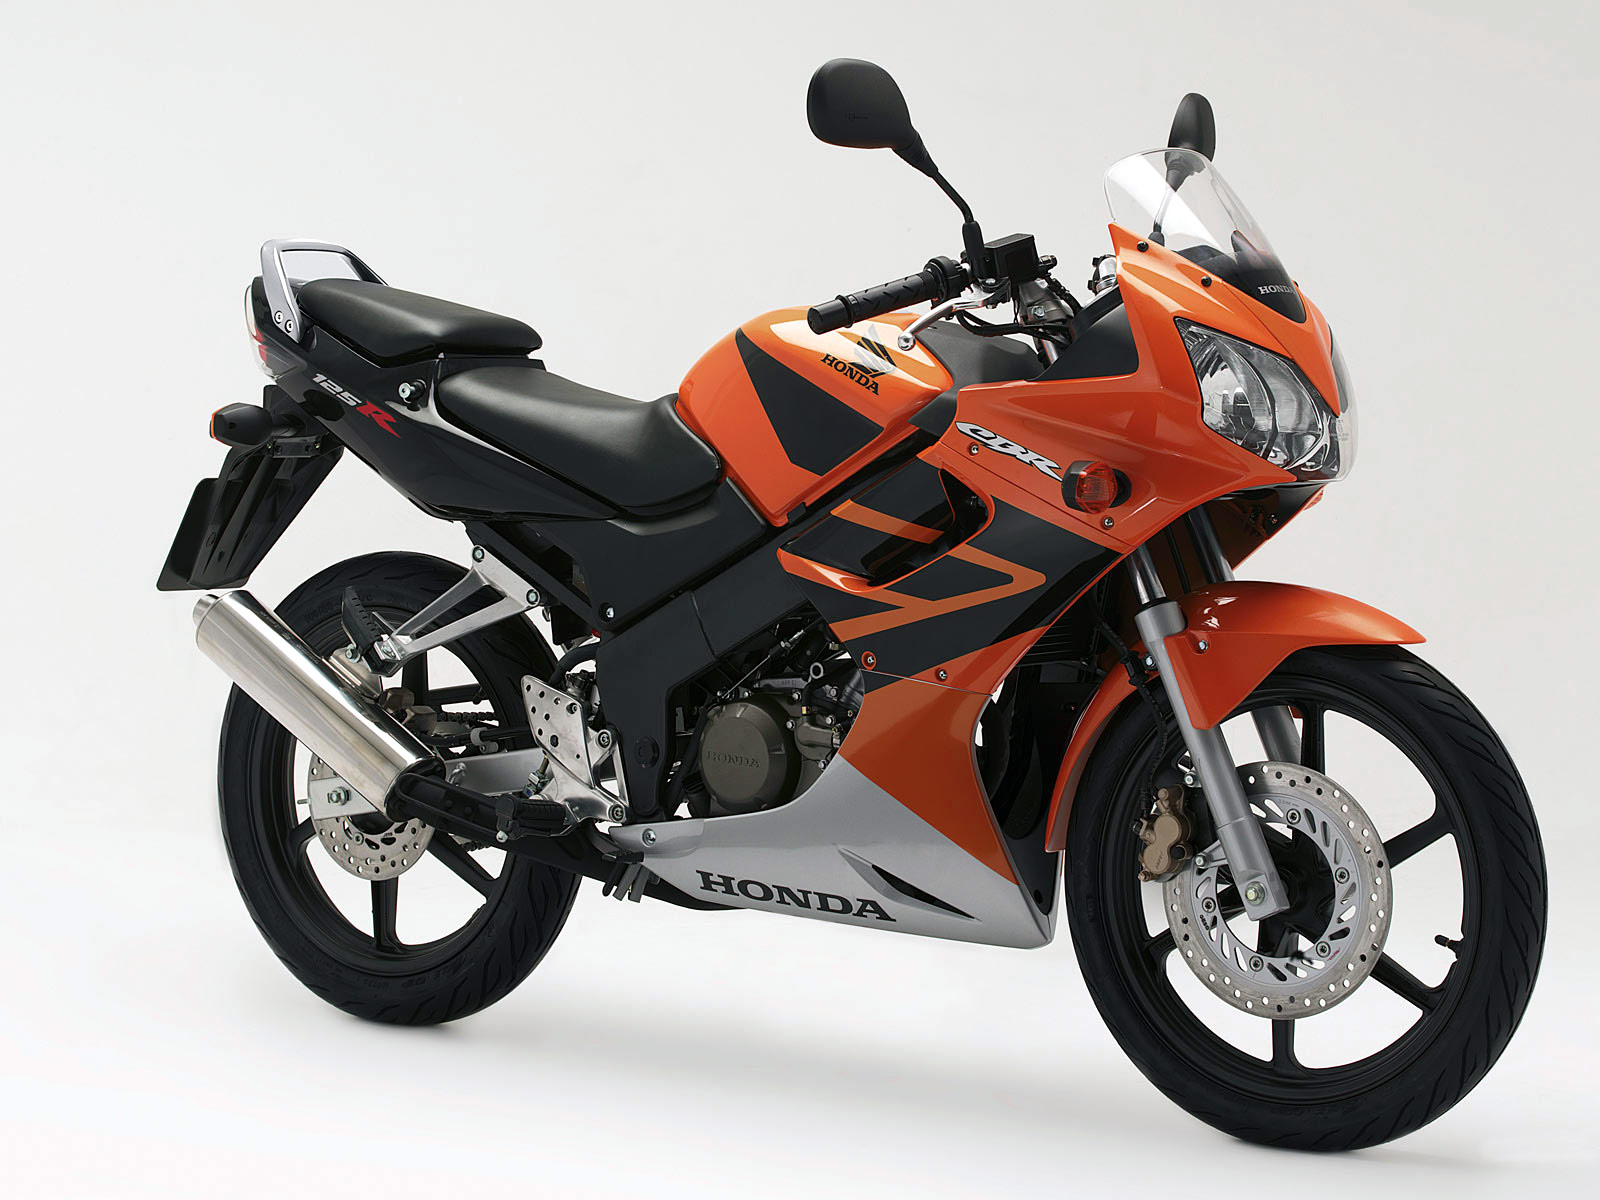 Motorcycle Photos, Specifications Review, Insurance, - Cbr 125 R 2006 , HD Wallpaper & Backgrounds